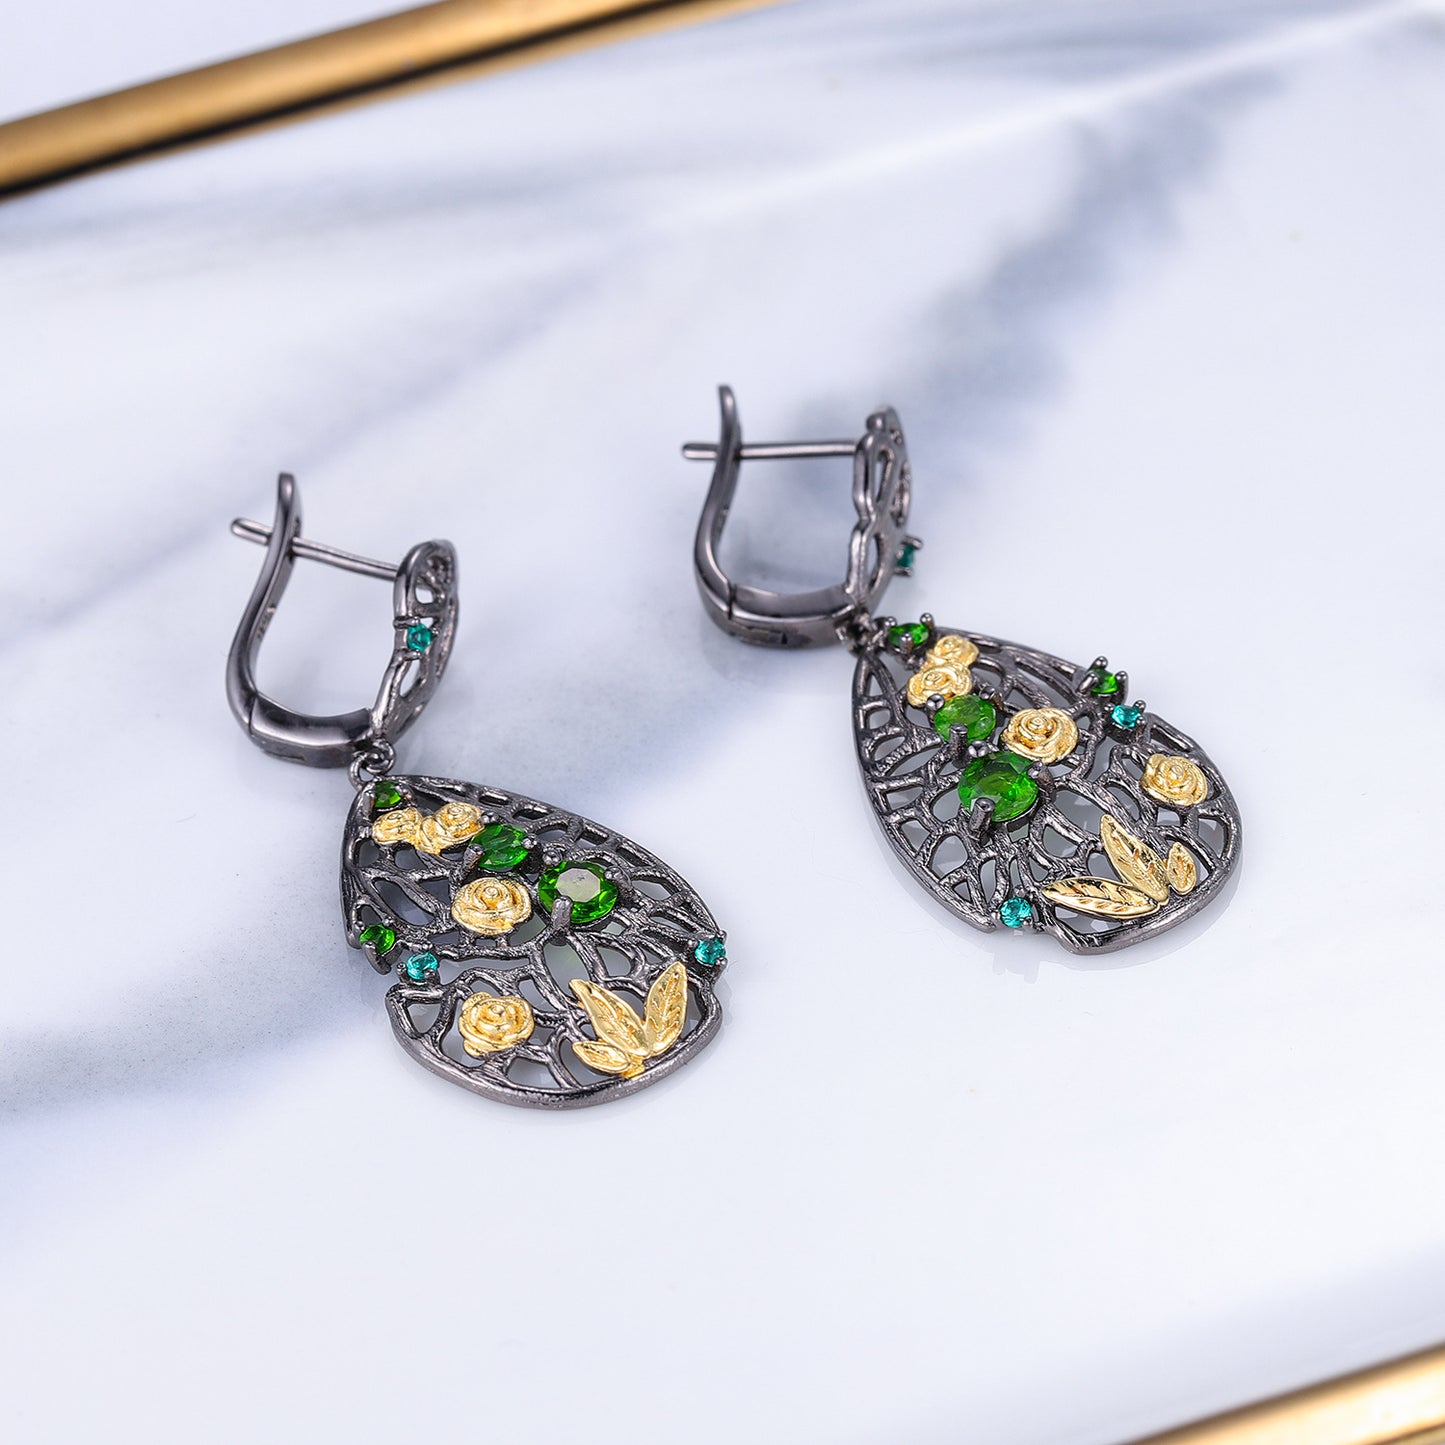 Vintage Elegant Style Inlaid Natural Colourful Gemstones Rose Garden Sterling Silver Drop Earrings for Women